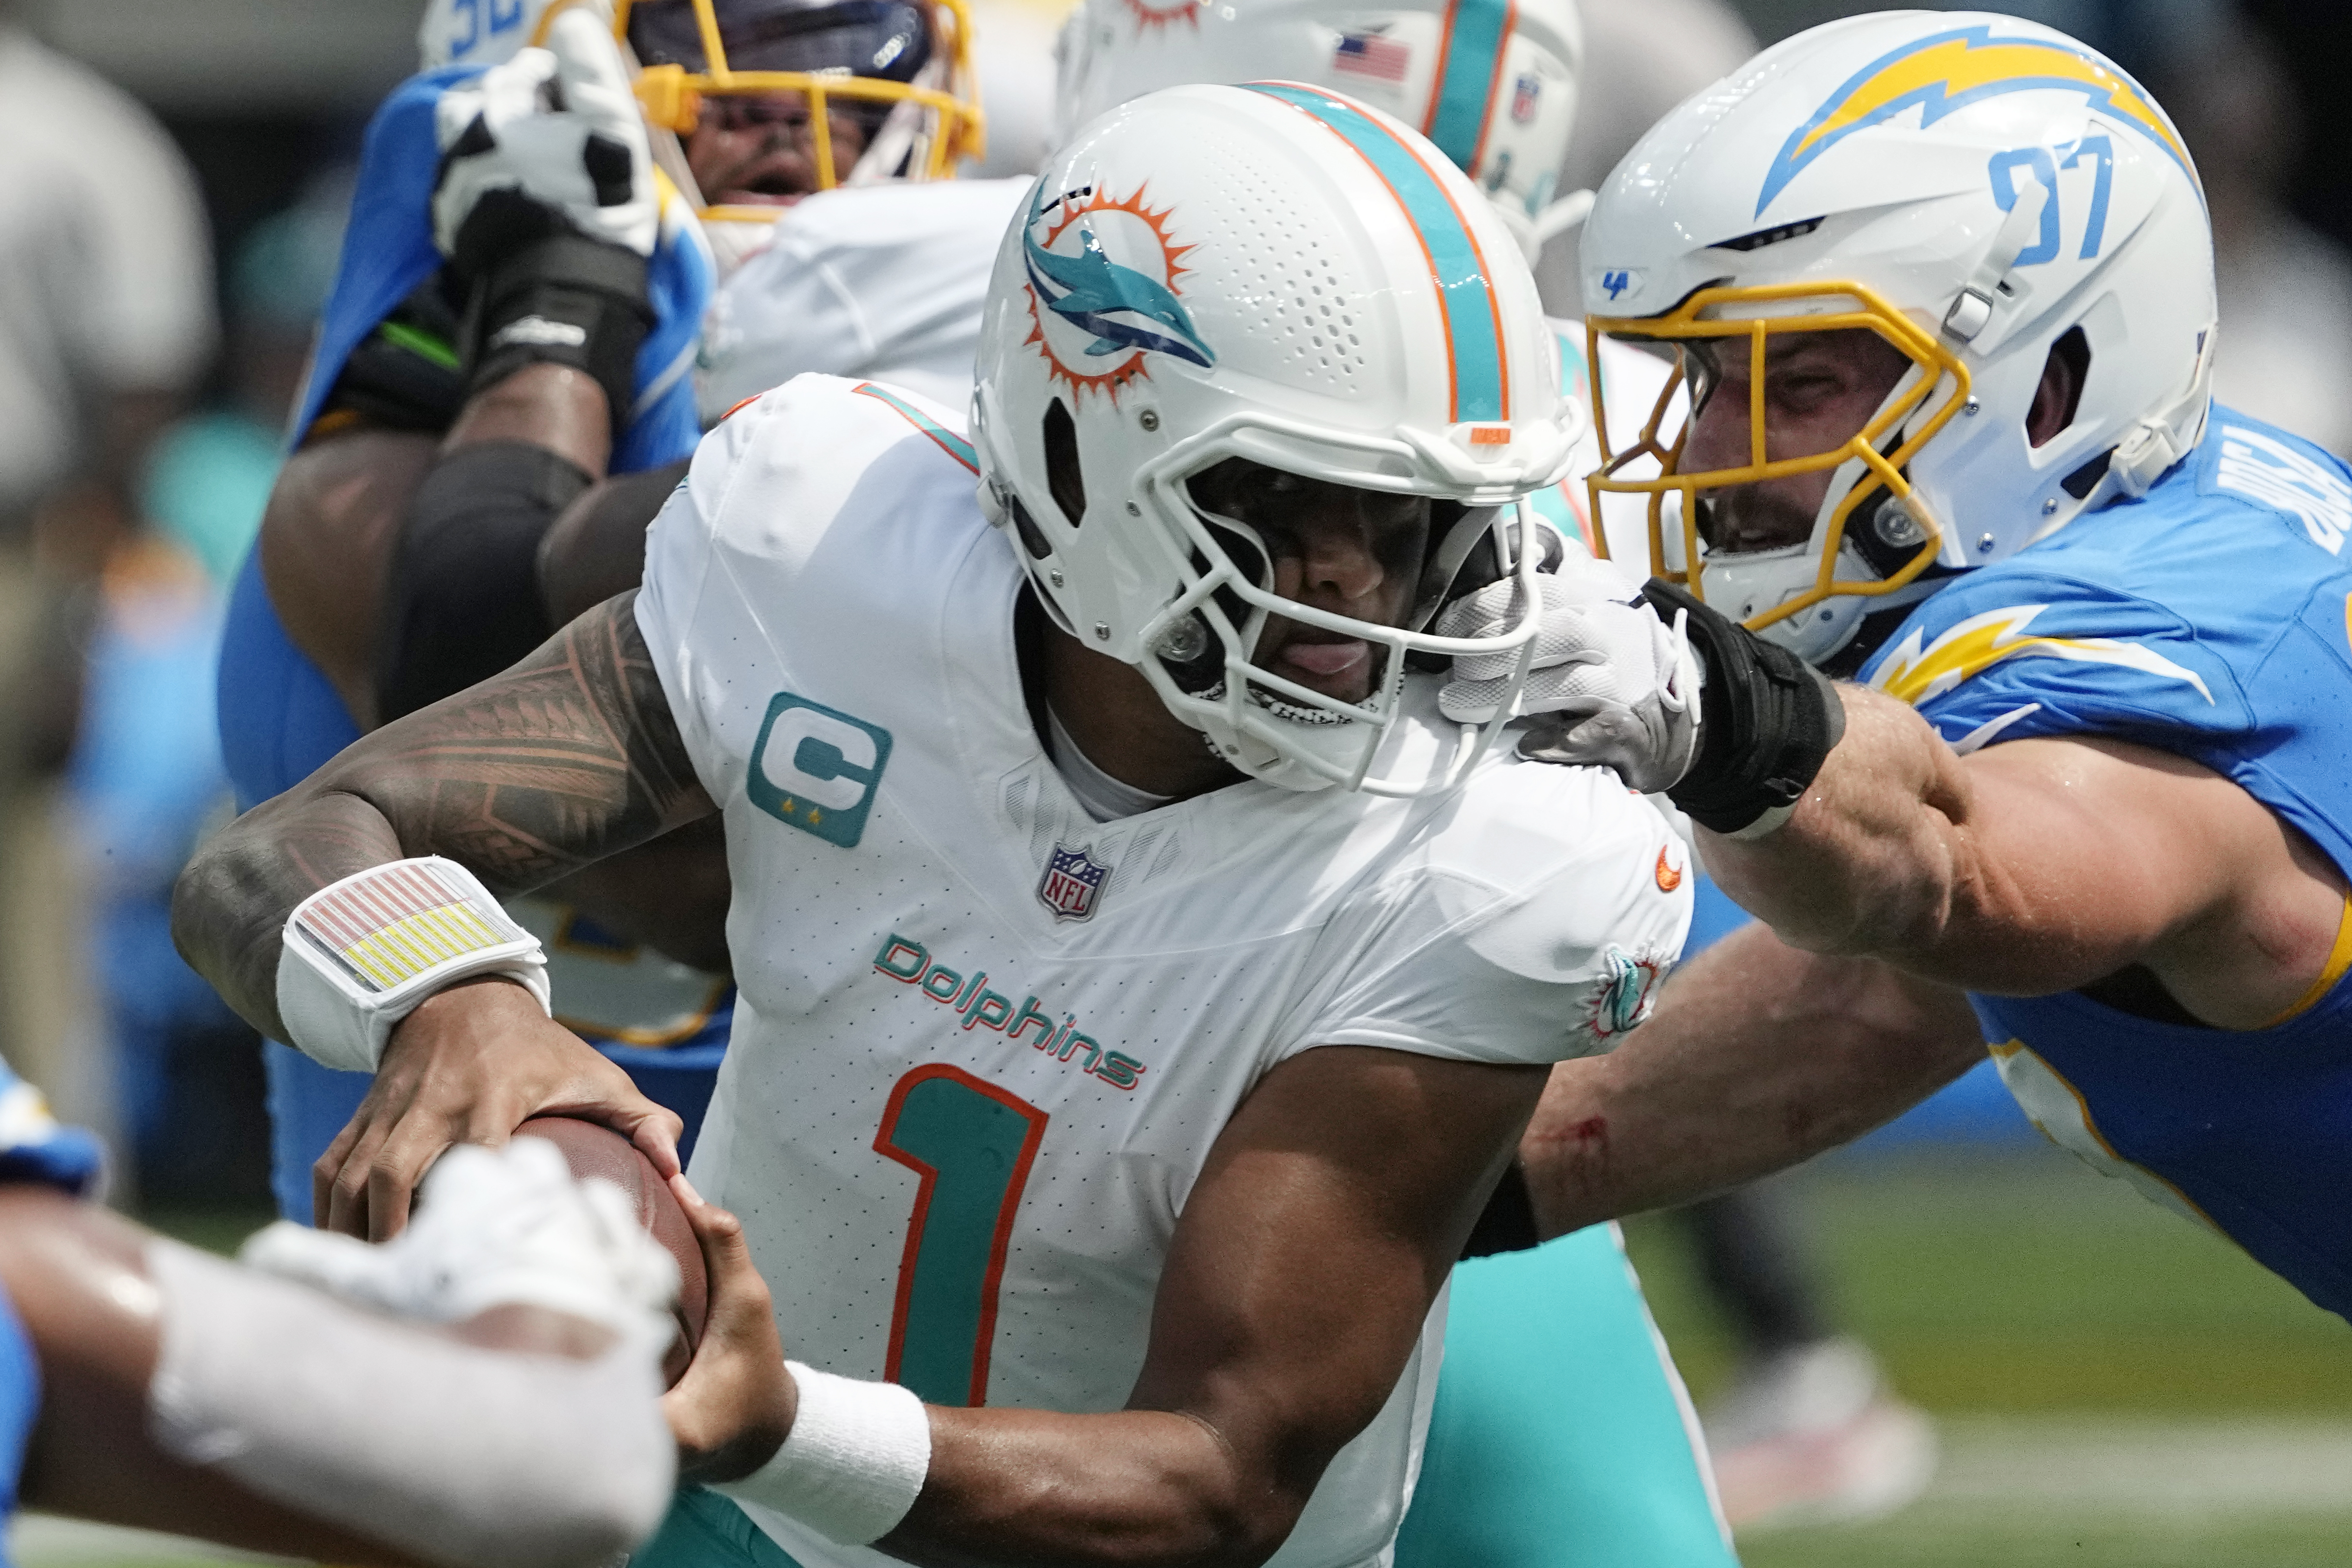 Dolphins beat Chargers with late game touchdown drive – NBC 6 South Florida